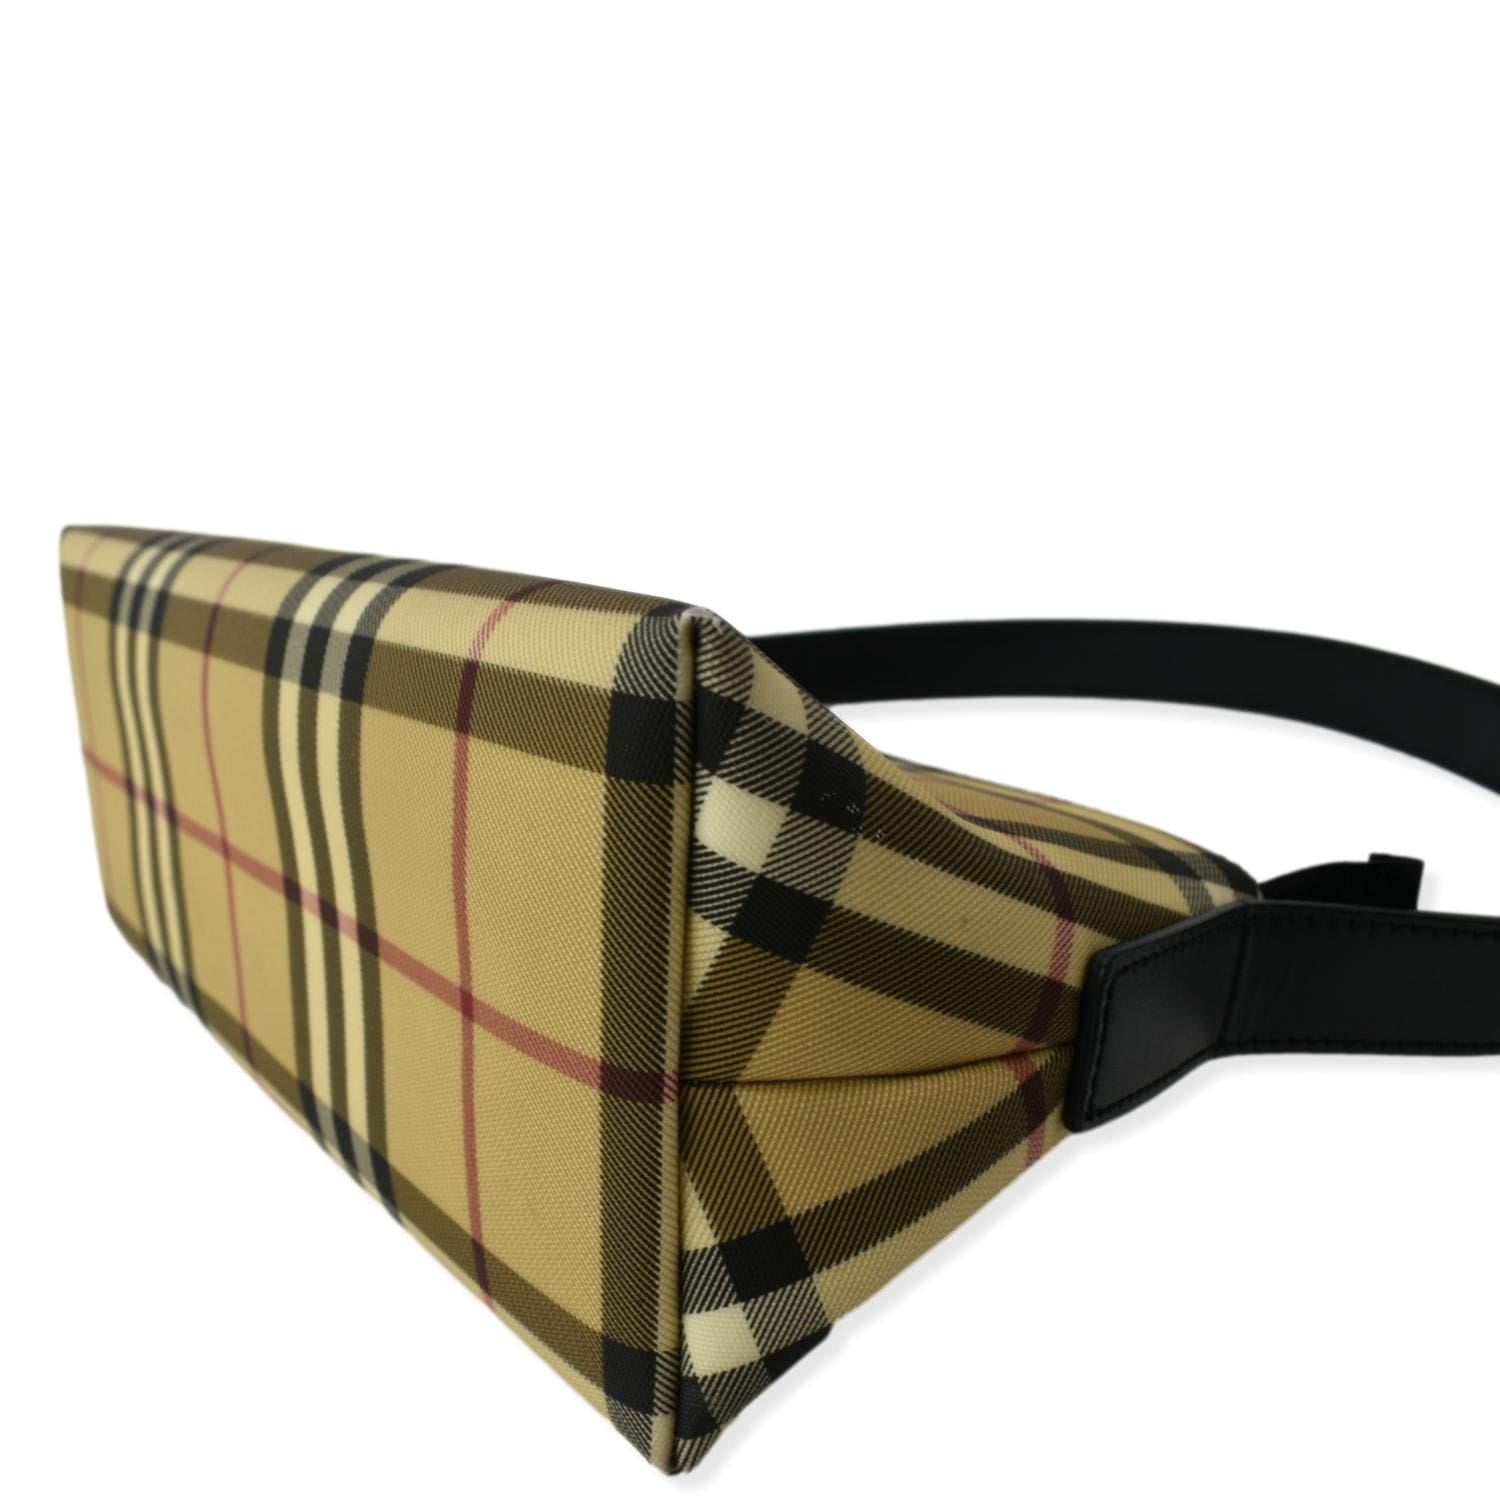 Burberry Vintage Check belt in coated canvas